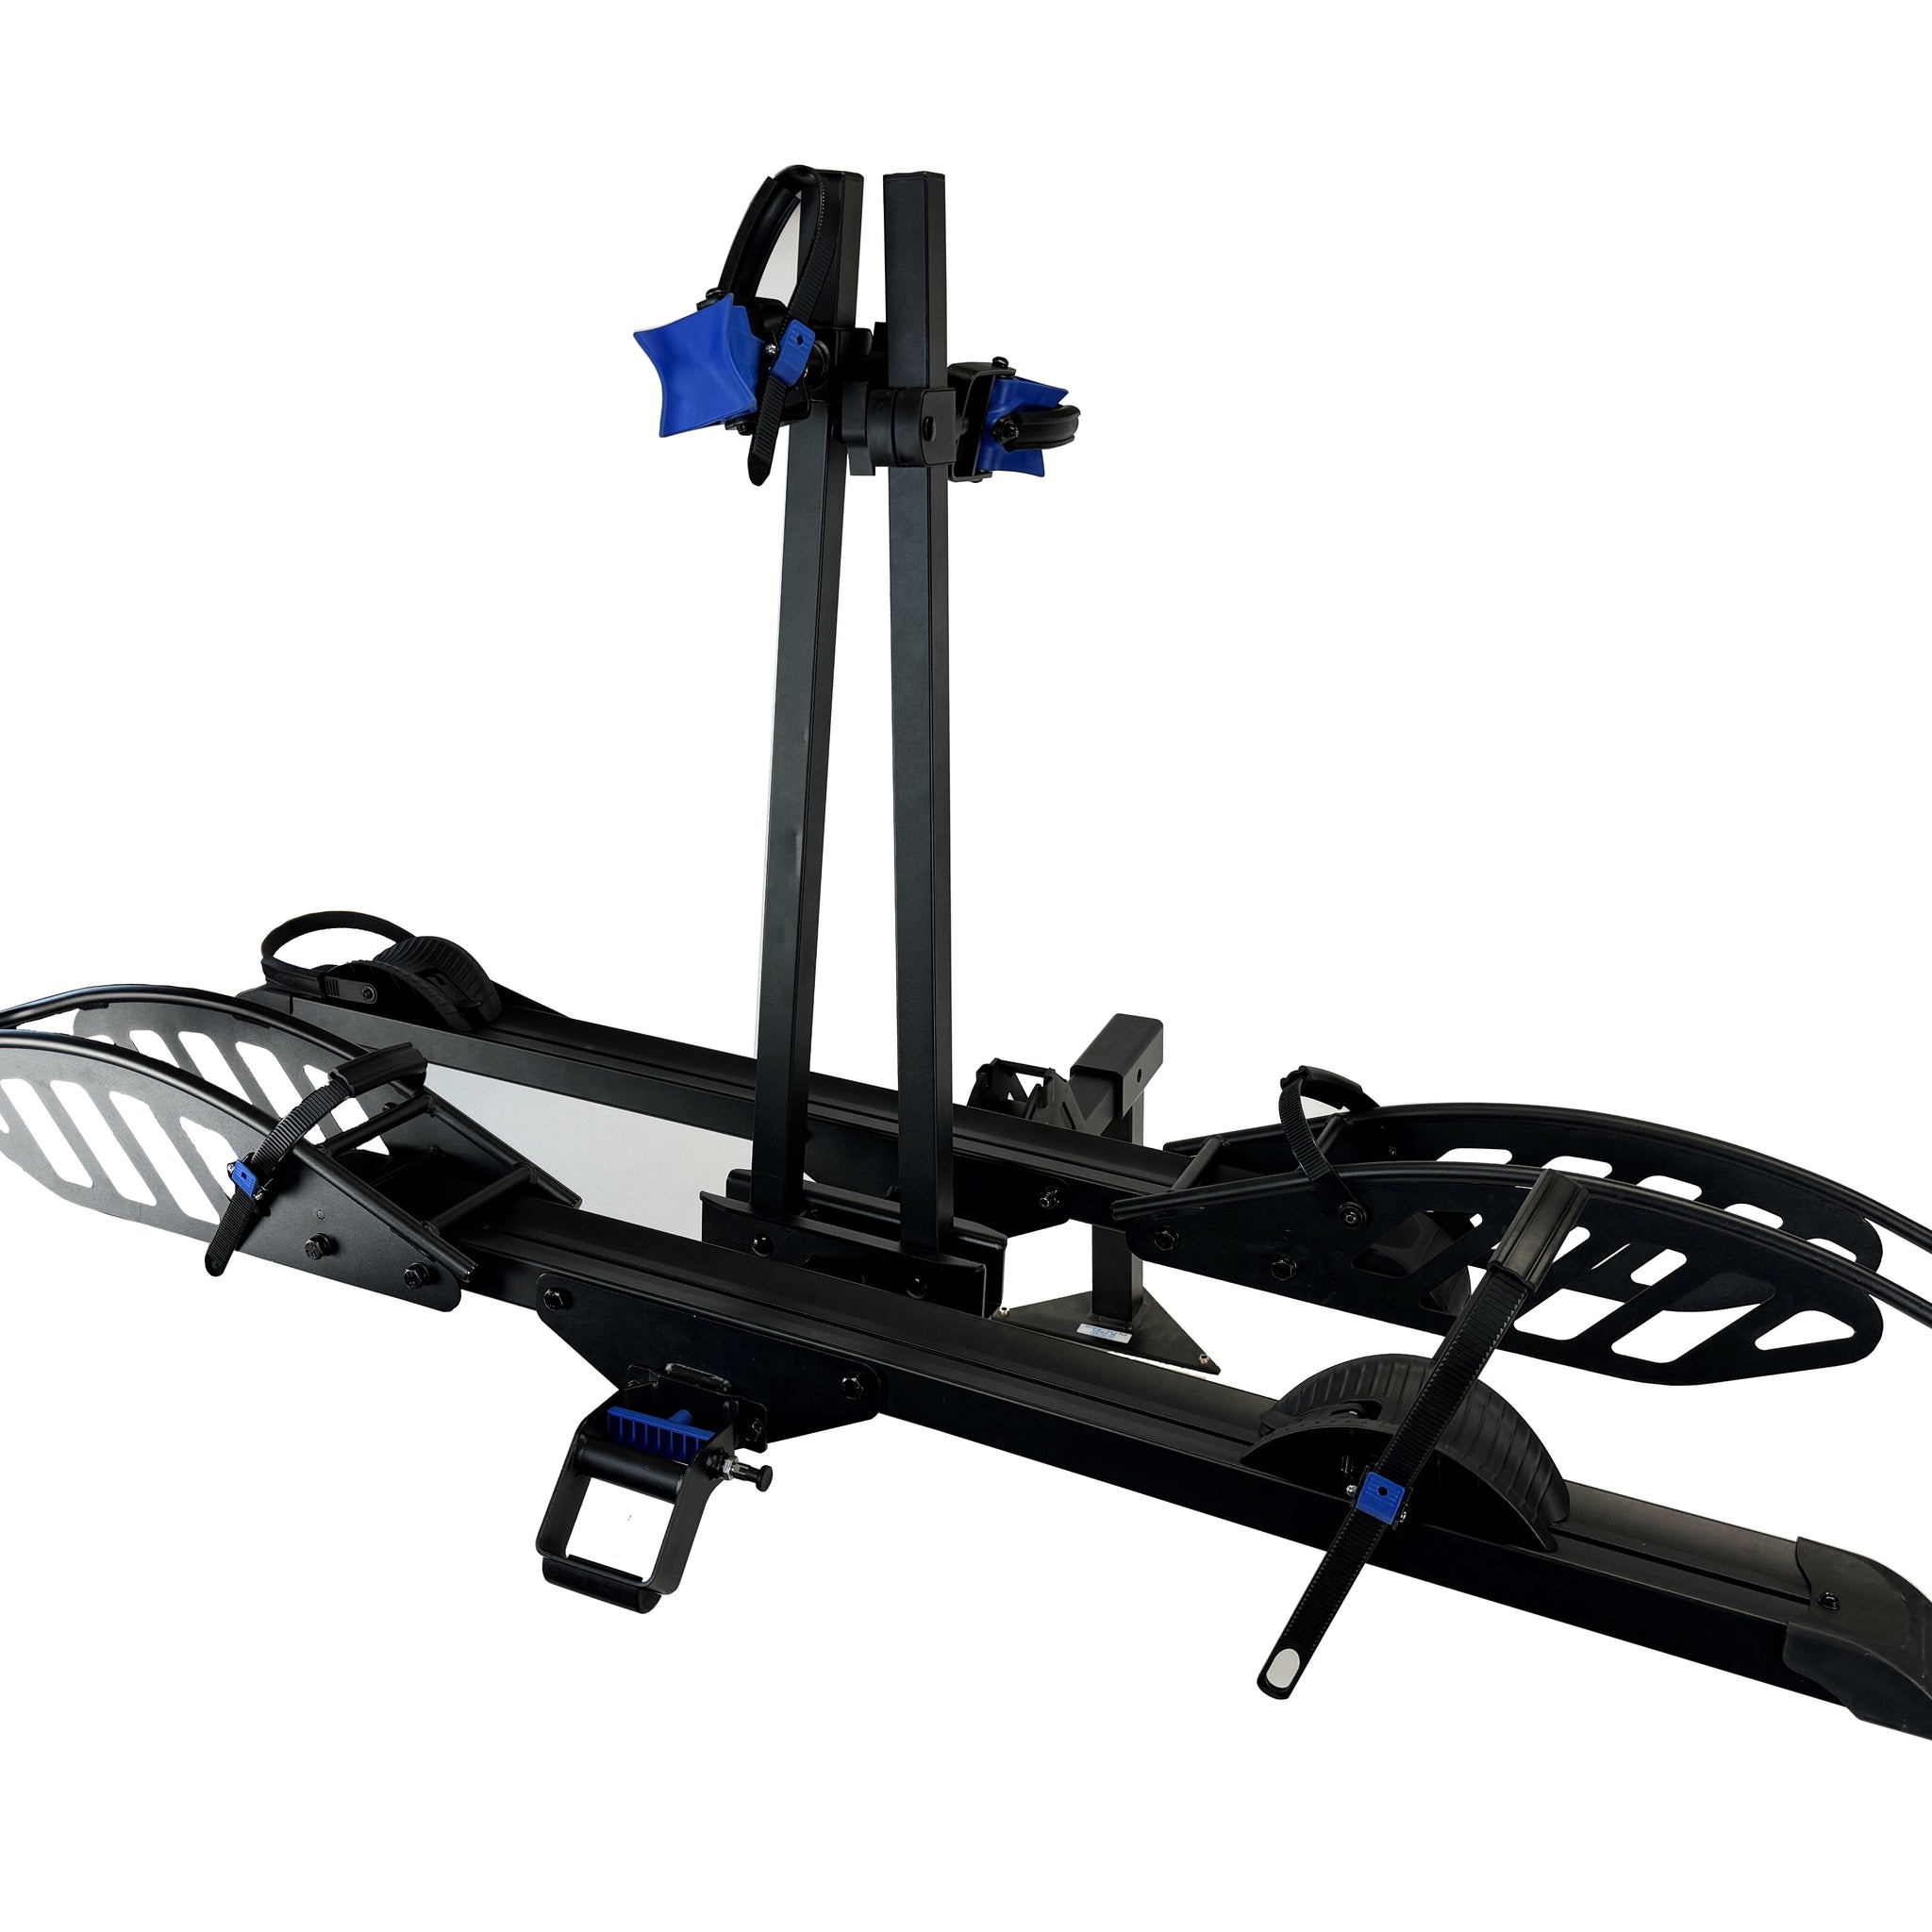 Advantage Deluxe 2 E-Bike Rack Hitch Mounted Platform Style with Ramp Included